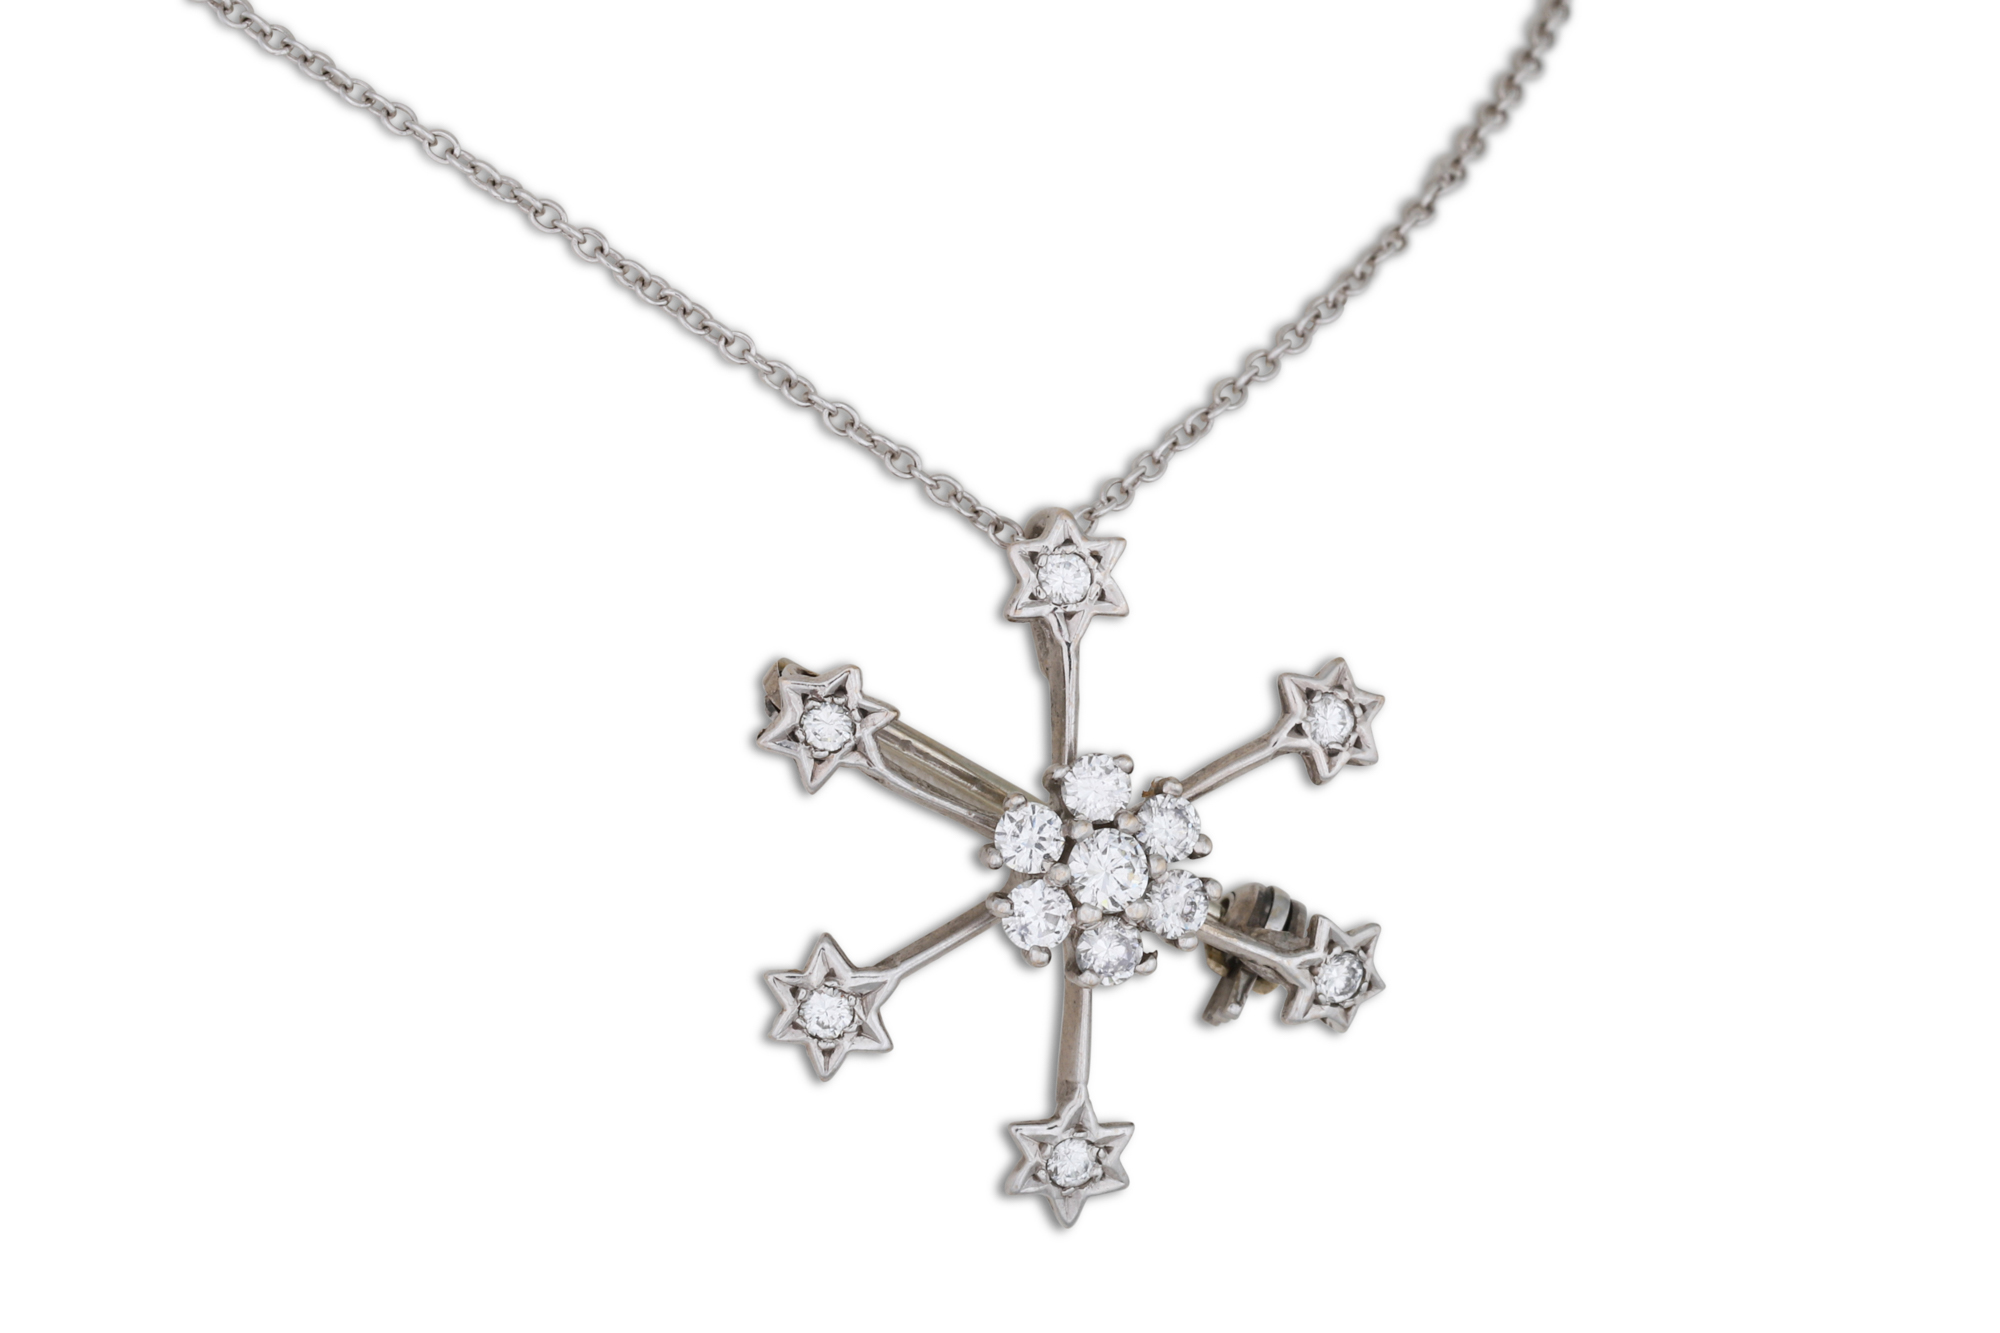 A DIAMOND SNOWFLAKE PENDANT/BROOCH, on a chain, mounted in 18ct white gold. Estimated: weight of